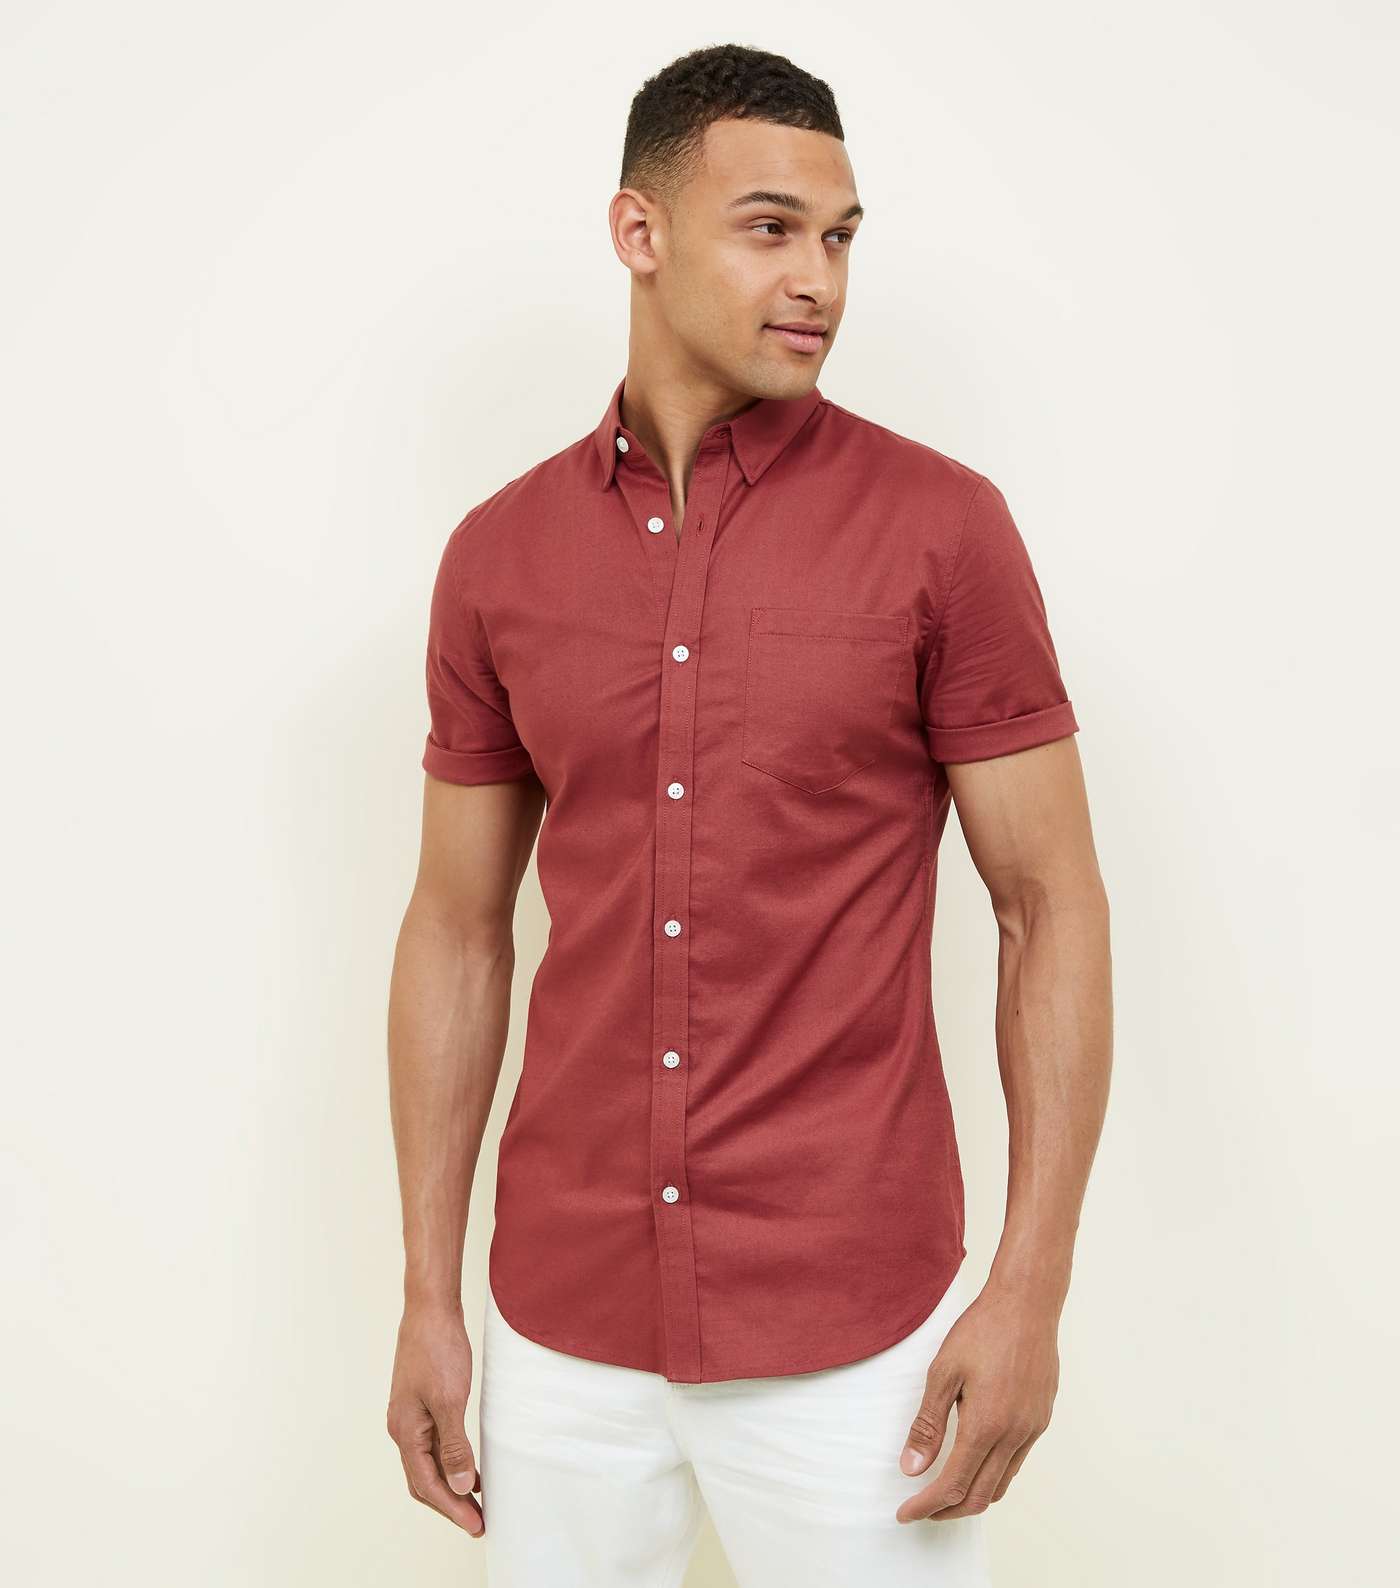 Rust Short Sleeve Muscle Fit Oxford Shirt